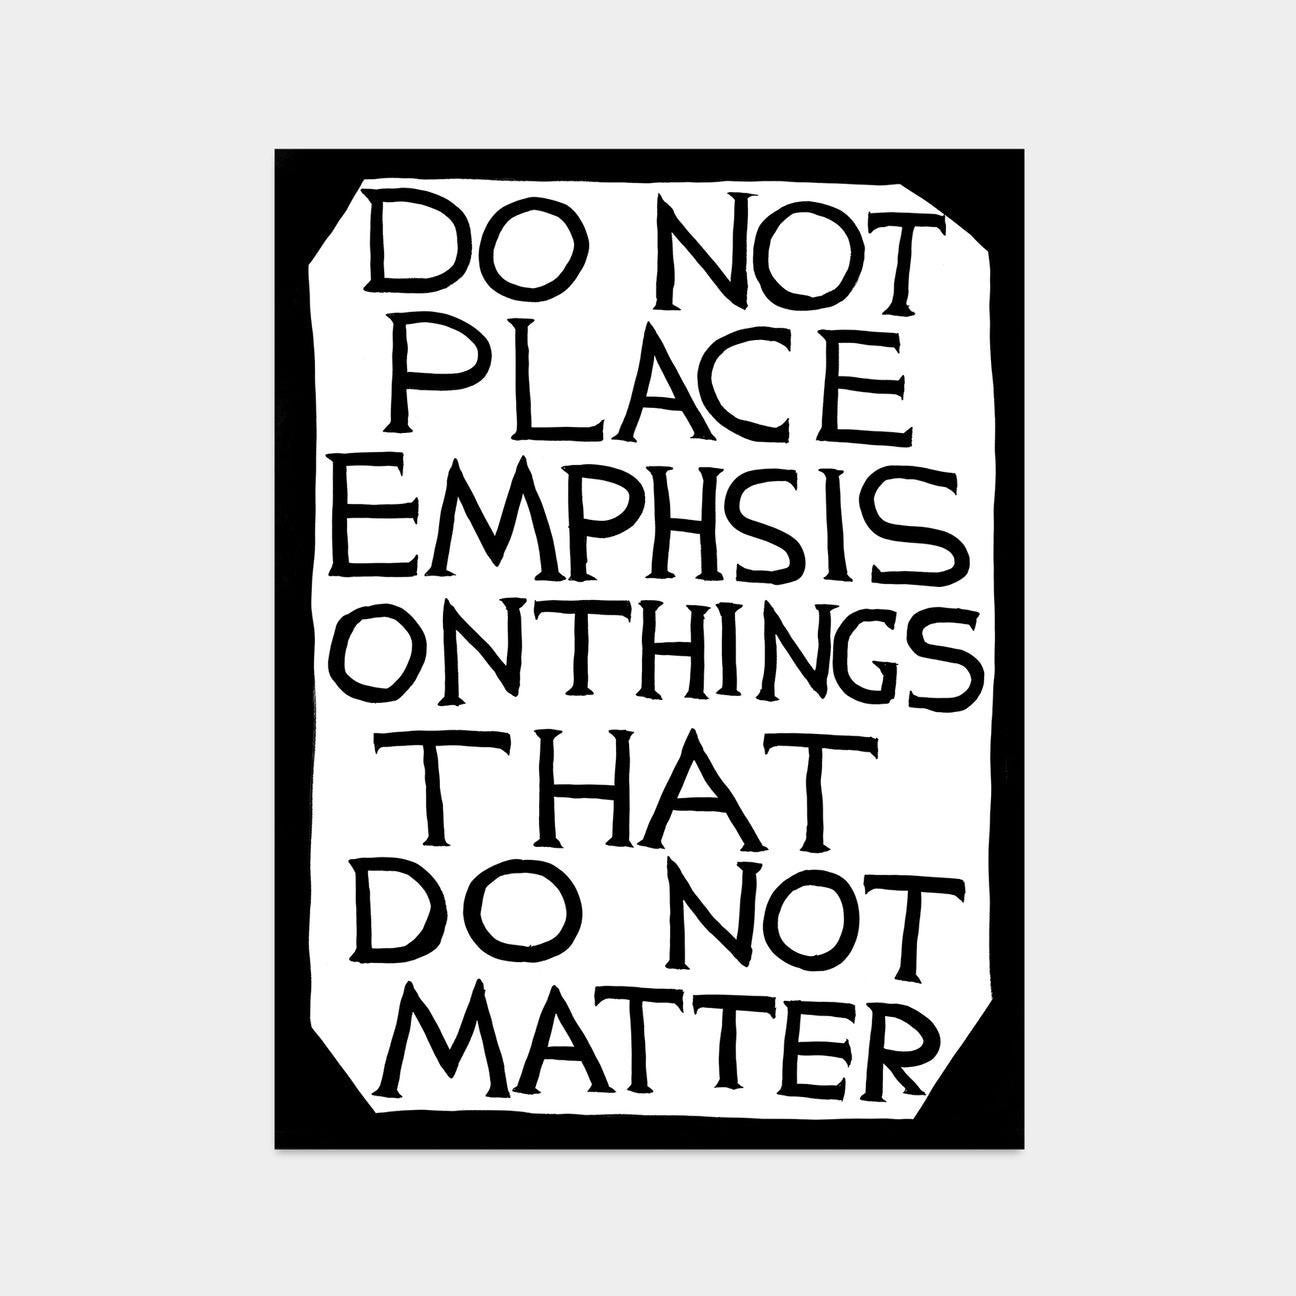 David Shrigley, Do Not Place Emphasis On Things That Do Not Matter, 2022

Off-set lithograph
Open edition, unframed 
50 x 70 cm (19.68 x 27.55 in) 
Printed on 200g Munken Lynx paper Narayana Press in Denmark

This print is based on the original